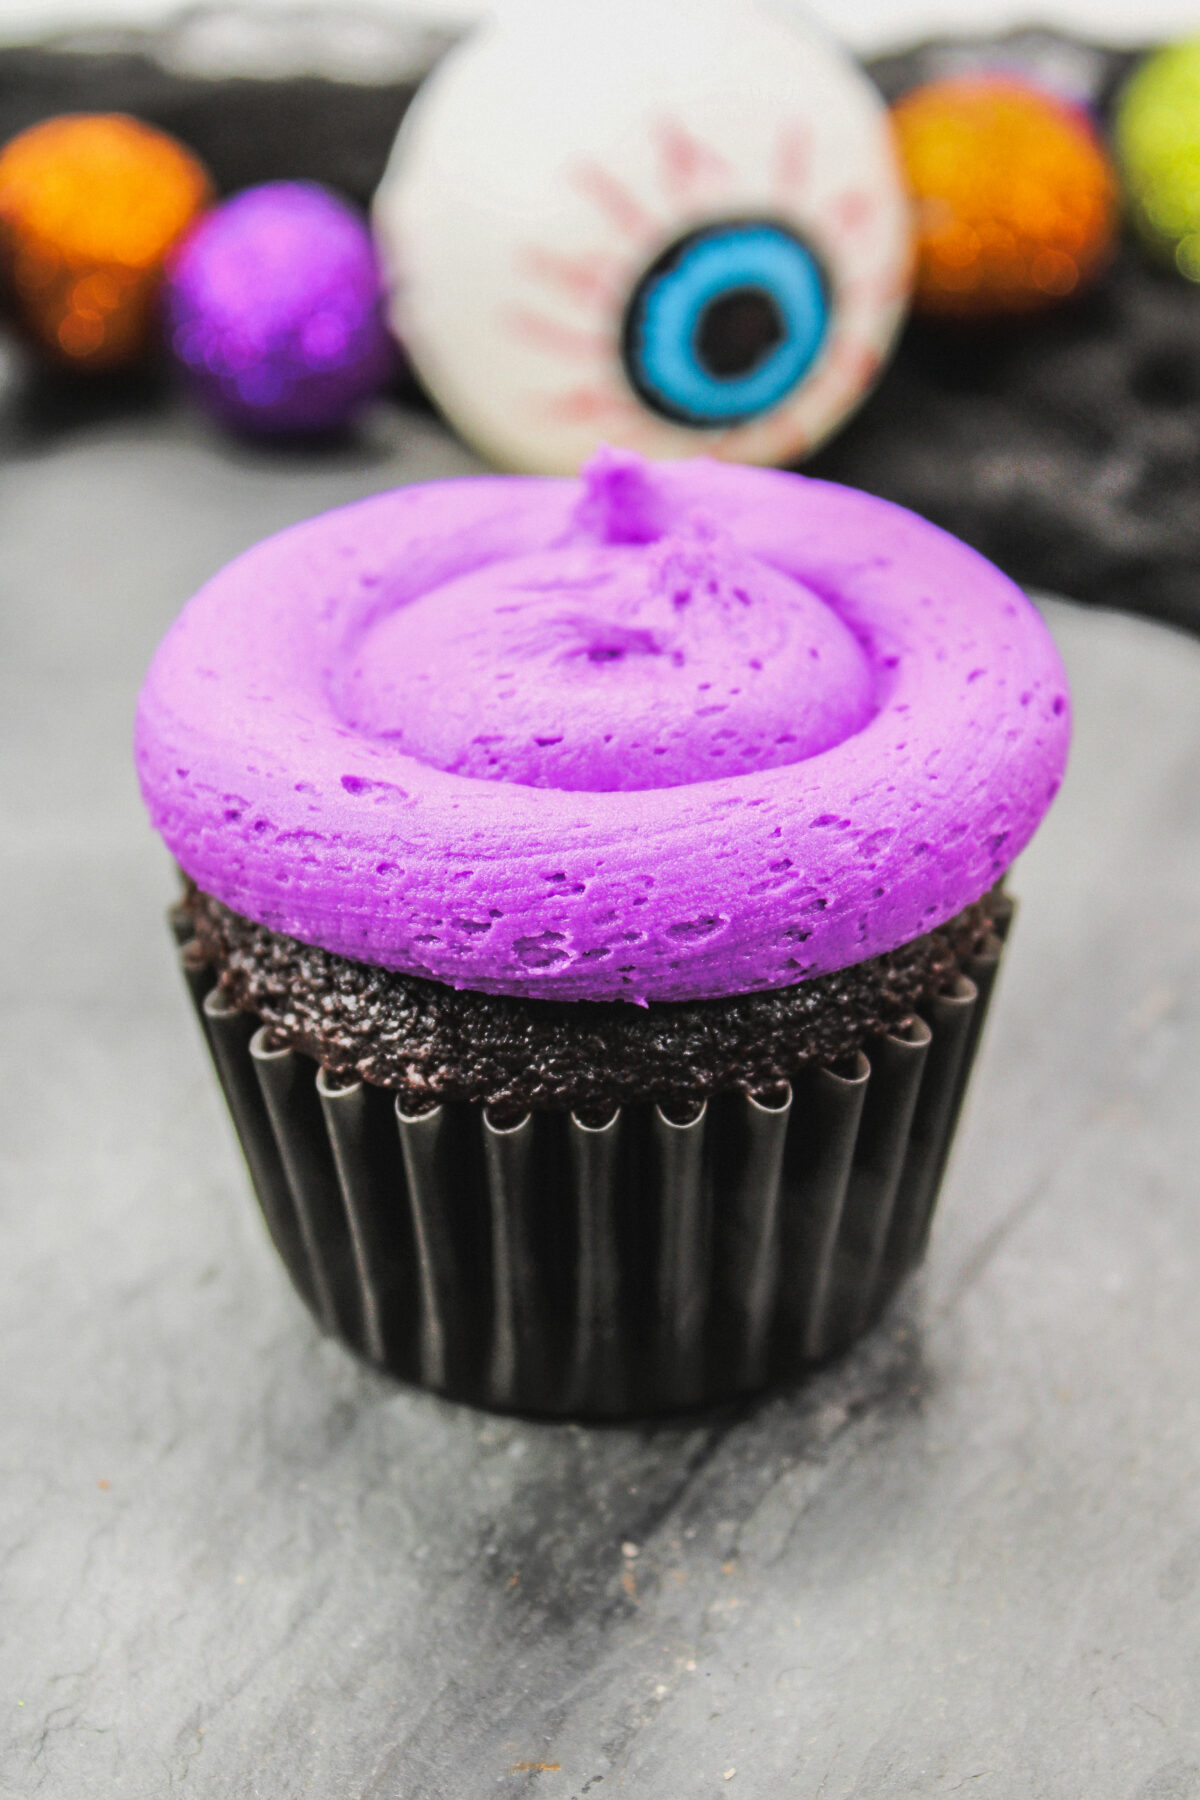 Cupcake with a layer of purple frosting.